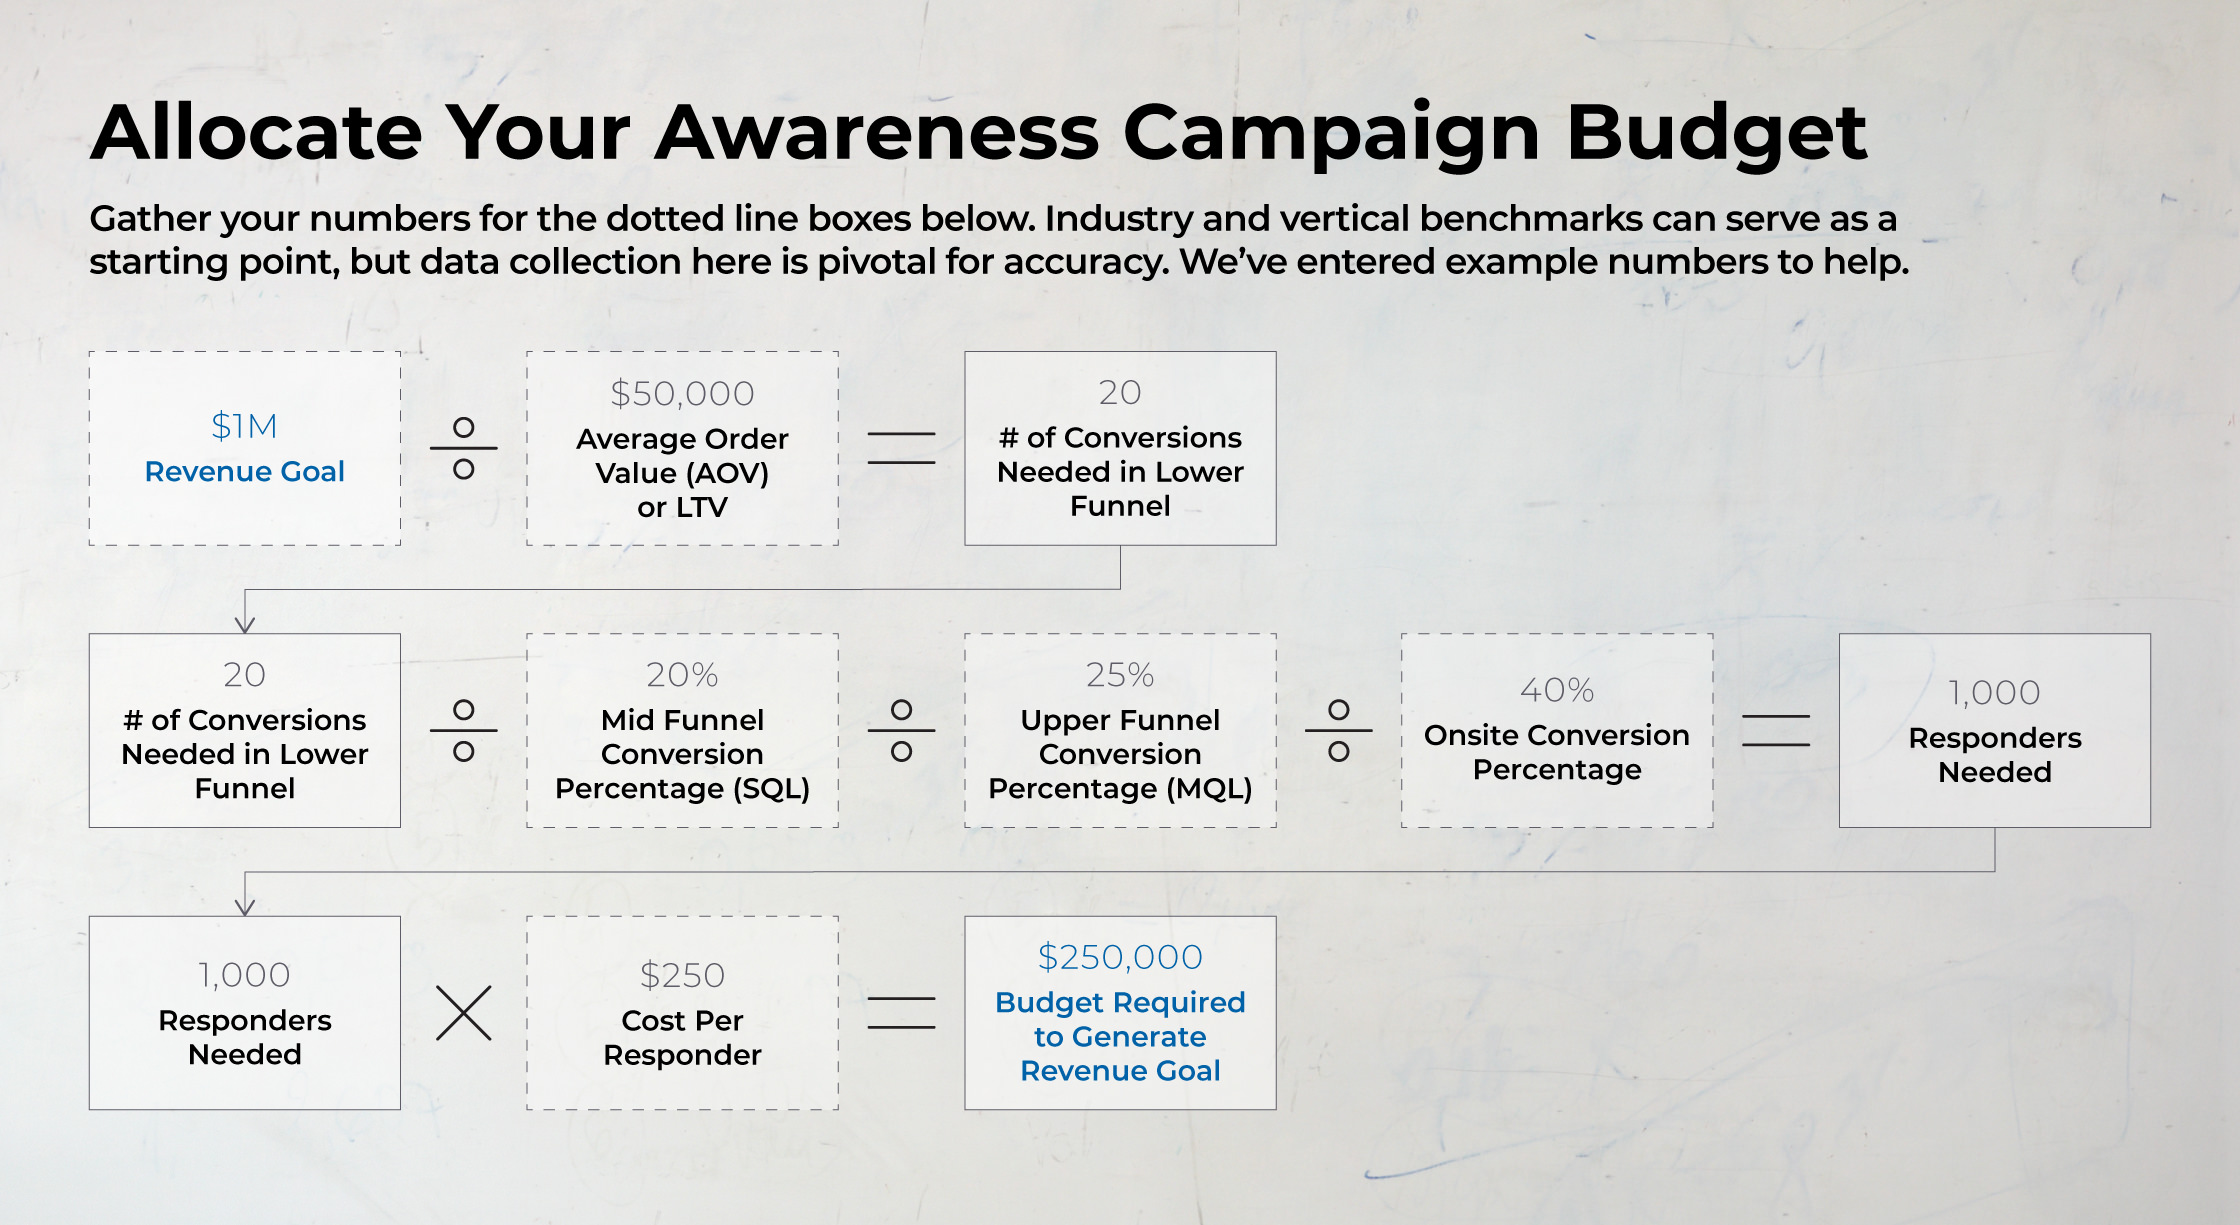 Allocate Your Awareness Campaign Budget to find the budget required to generate revenue goal